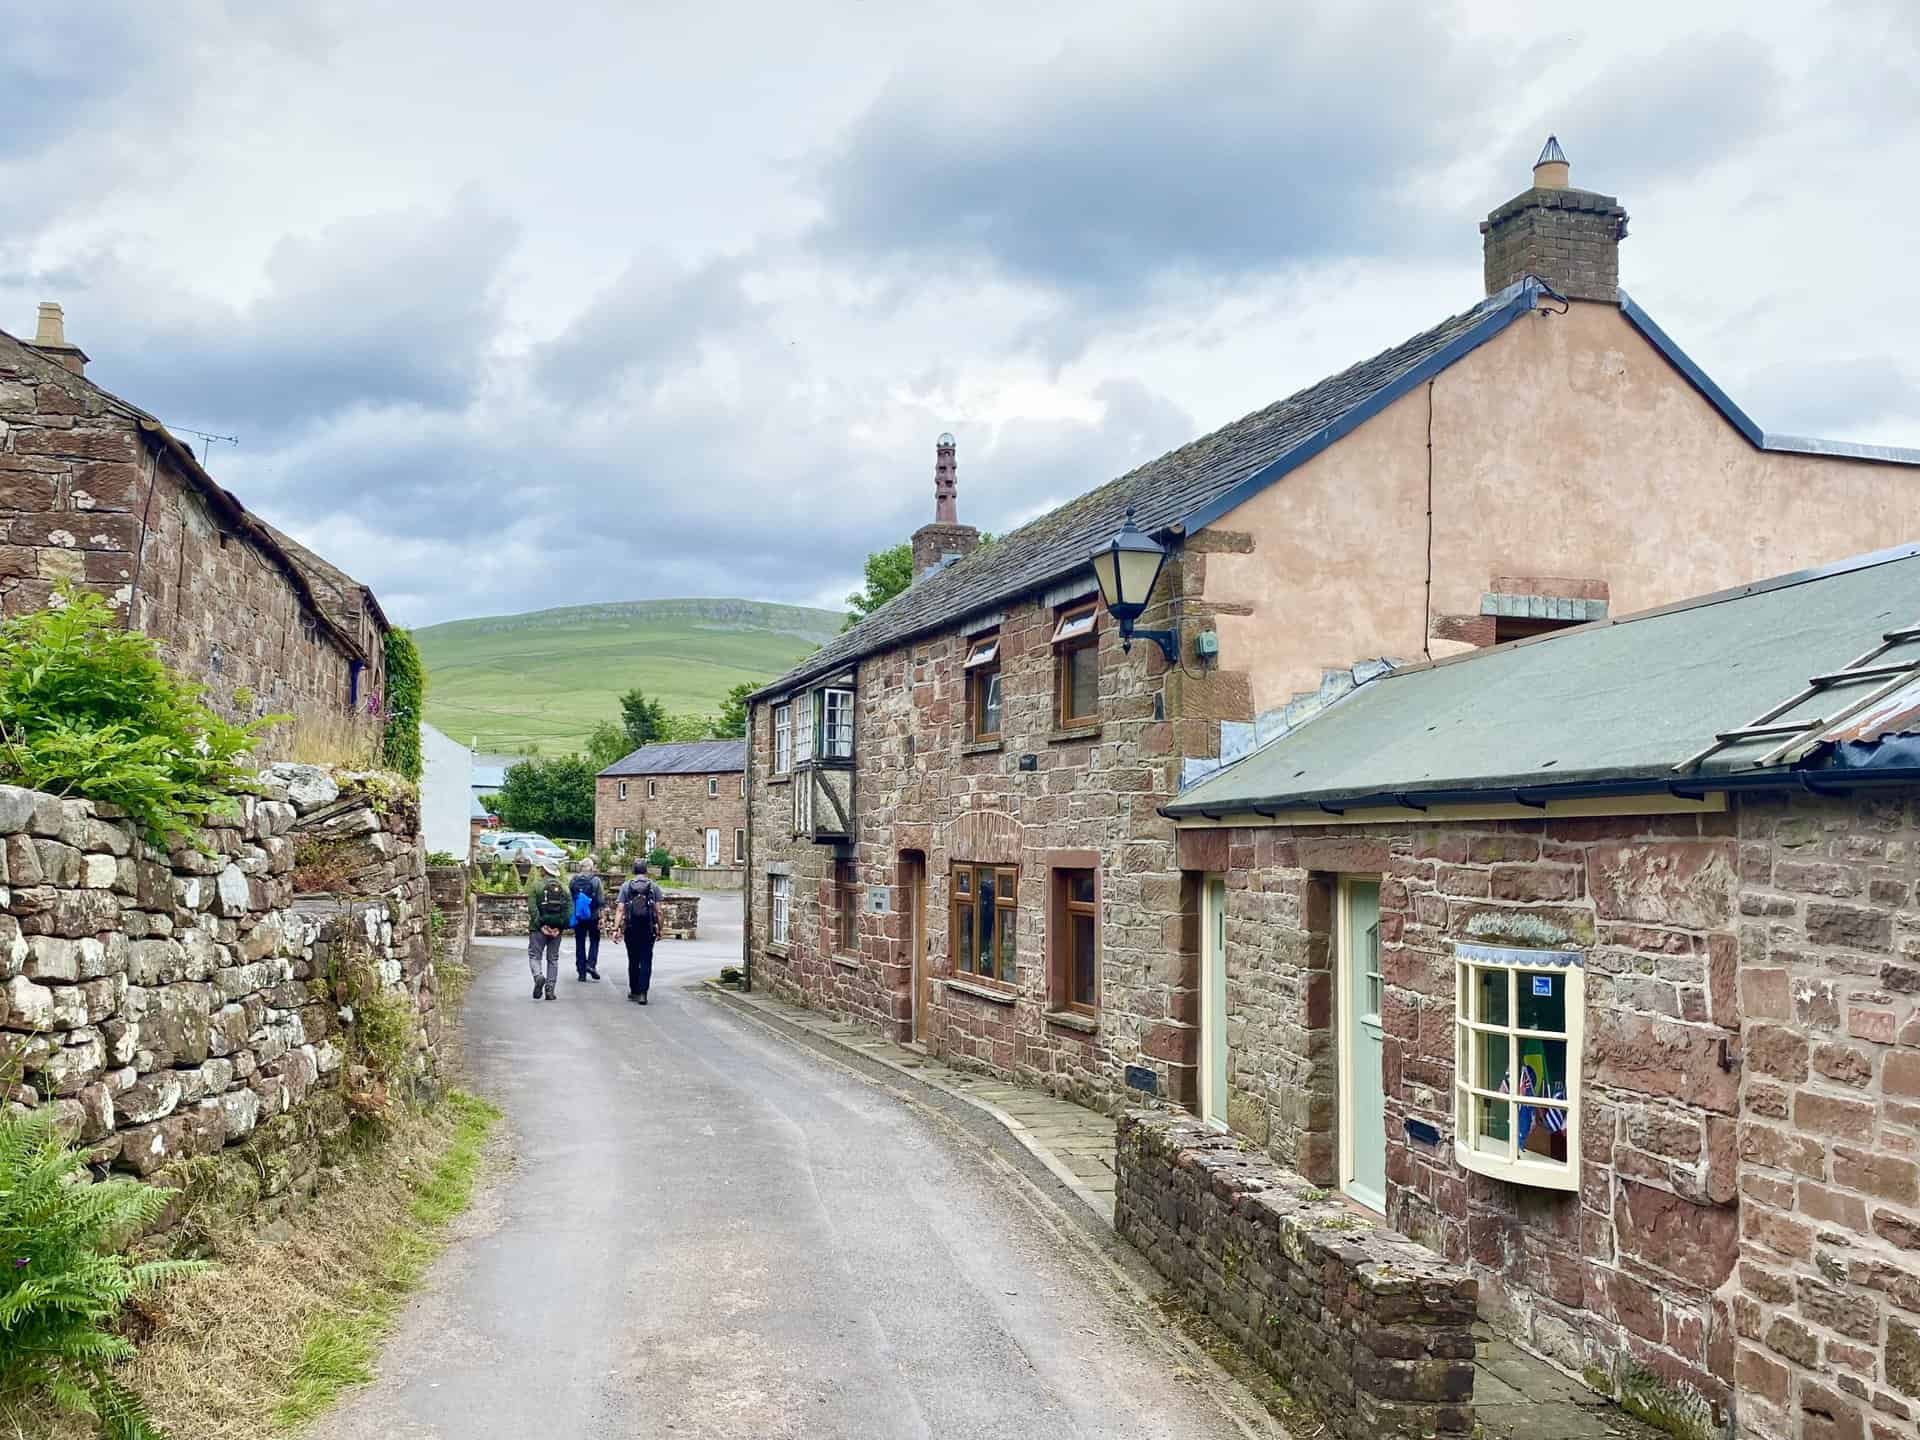 The village of Murton, the starting and ending point of this High Cup Nick circular walk.